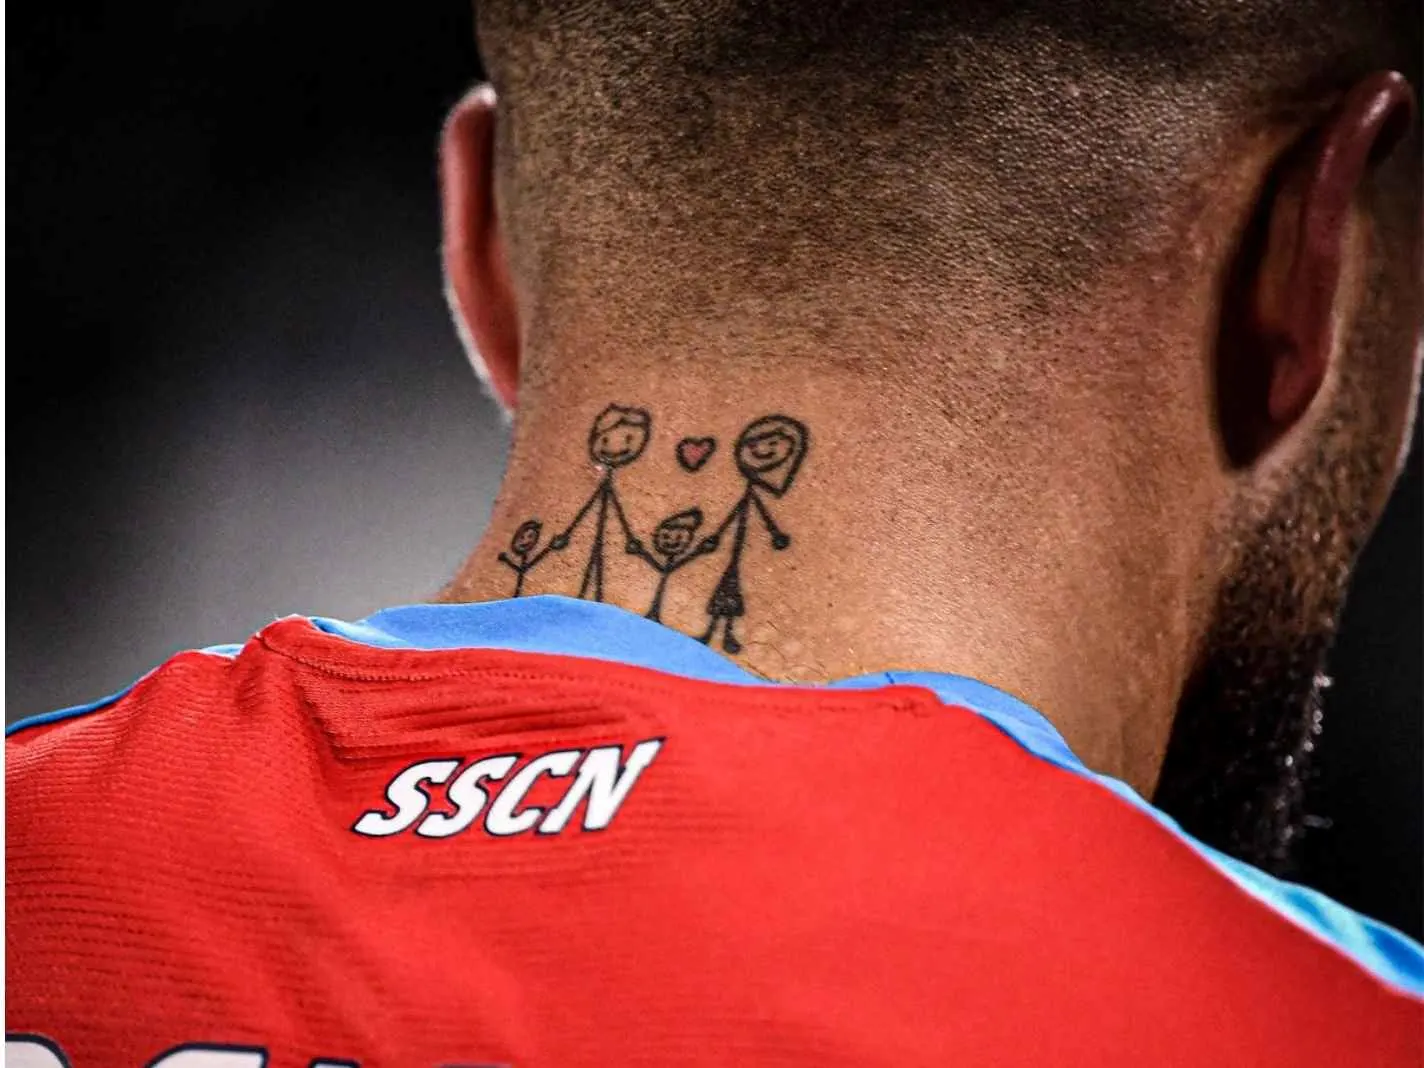 Lorenzo Insigne has a tattoo at the back of his neck